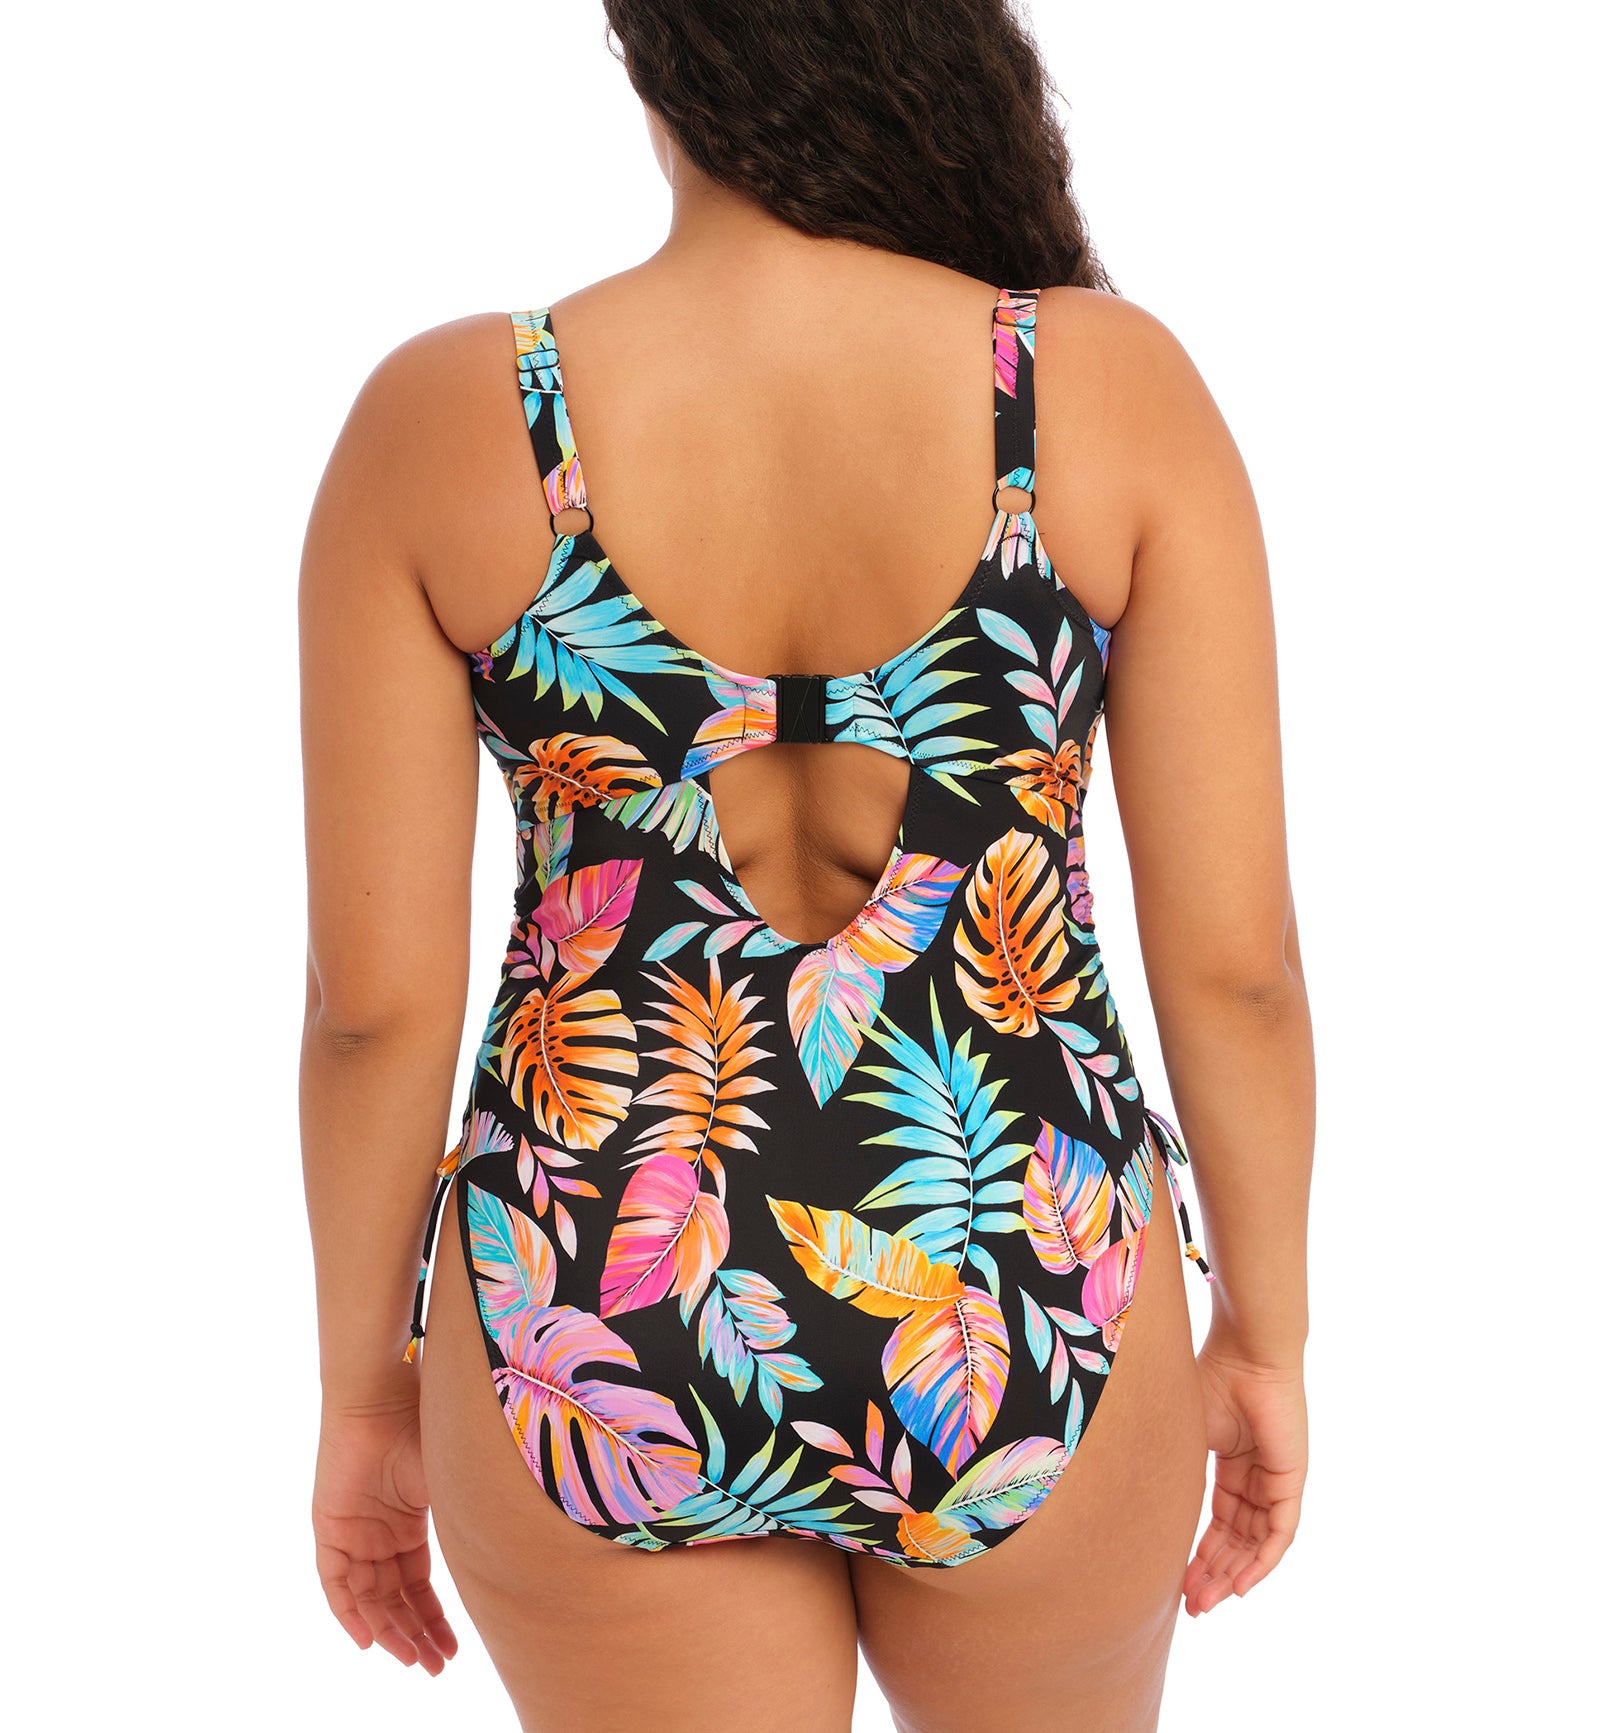 Elomi Tropical Falls Non Wire One Piece Swimsuit (ES801543),34 G/GG,Black - Black,34 G/GG